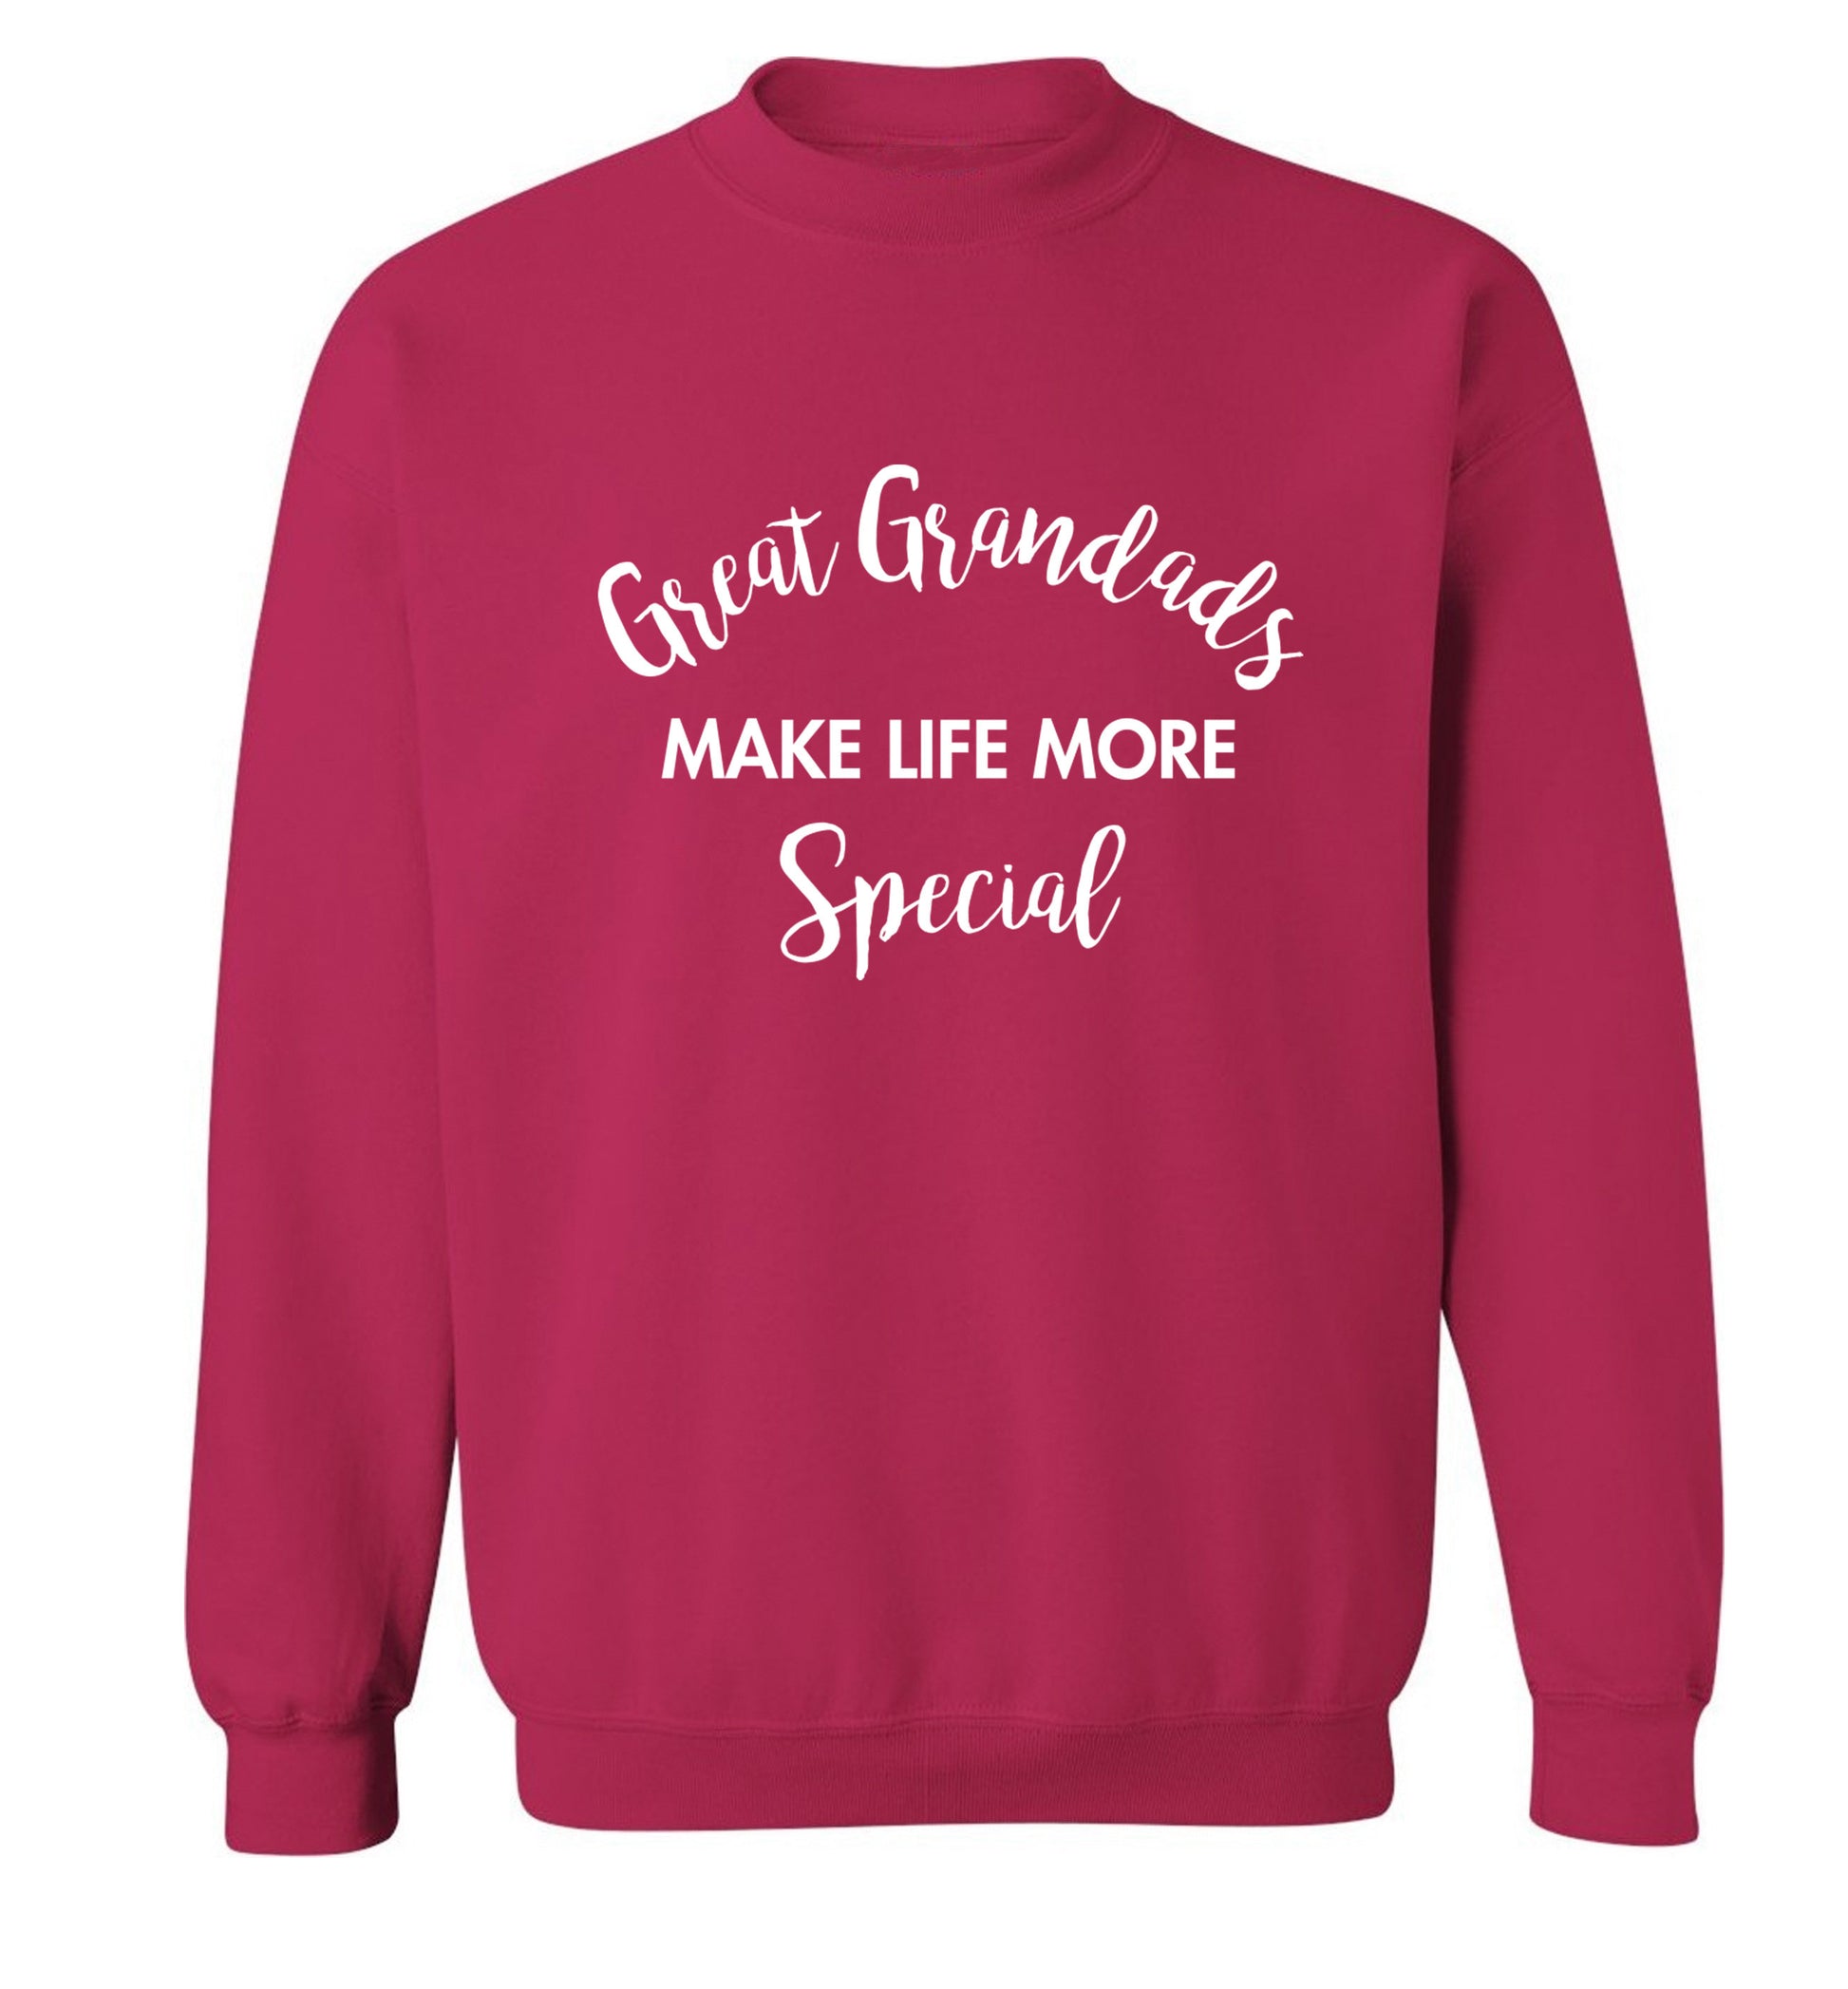 Great Grandads make life more special Adult's unisex pink Sweater 2XL